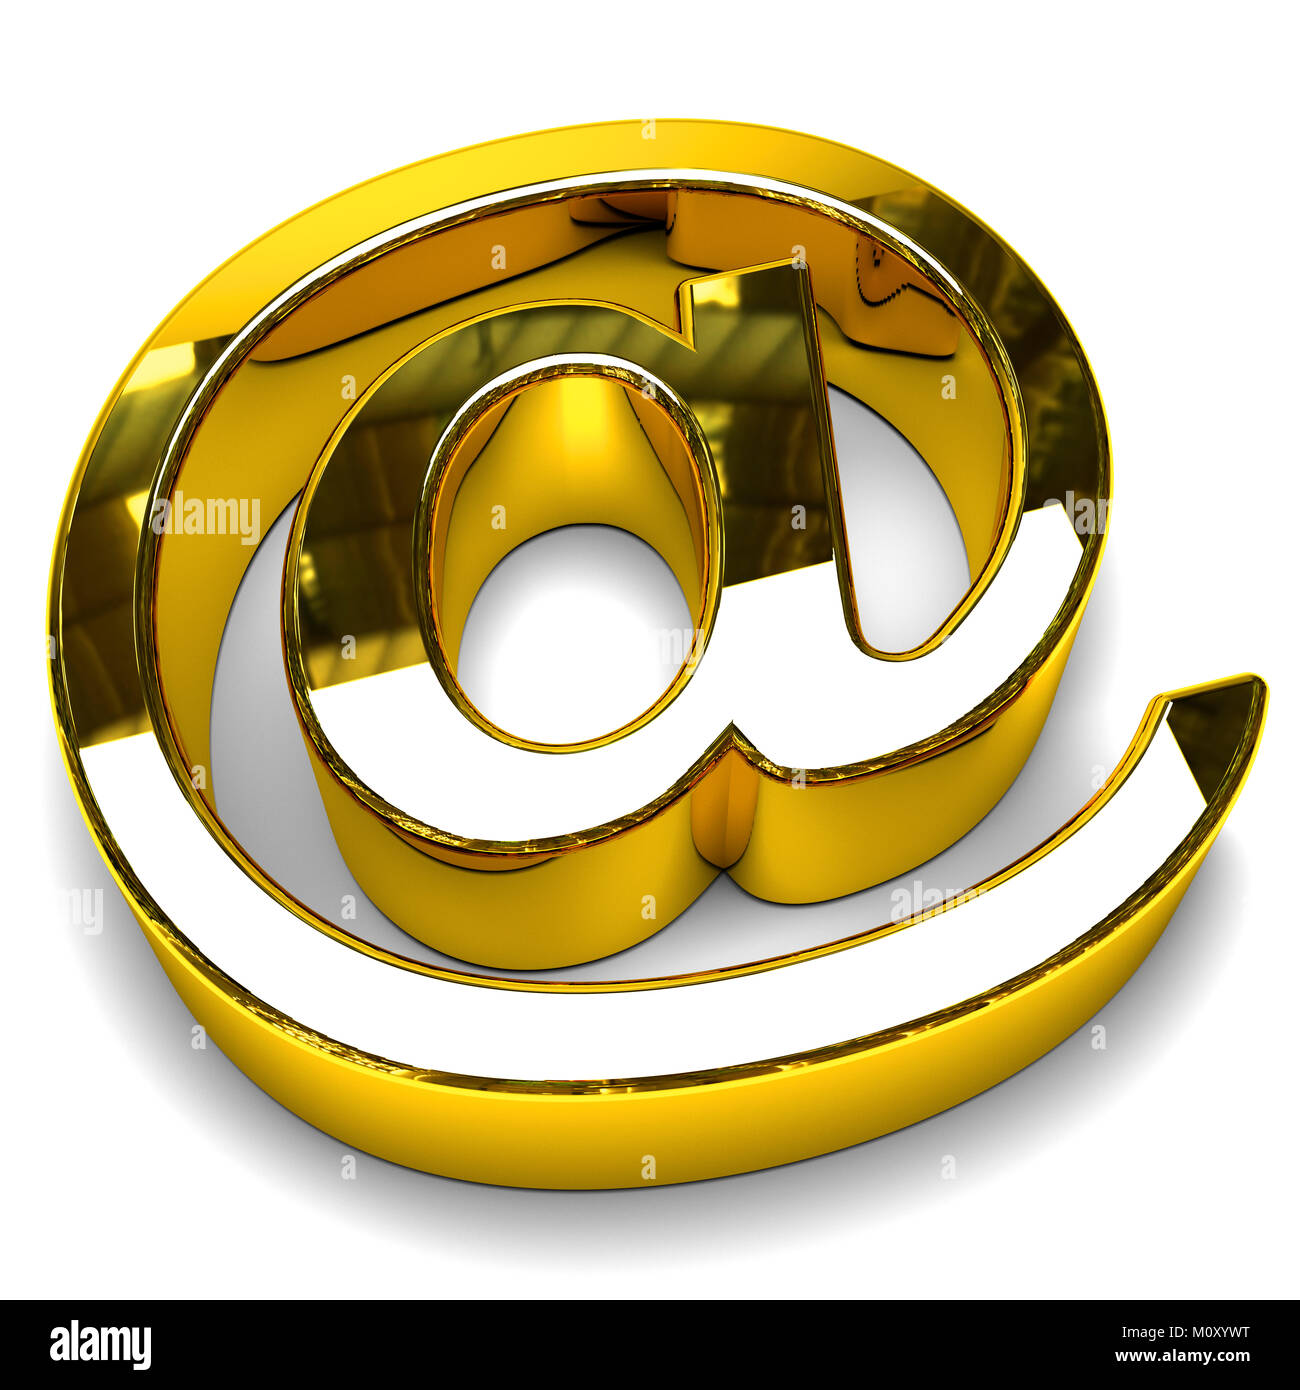 At or @ symbol of gold color, for use in e-mail. Isolated white background Stock Photo